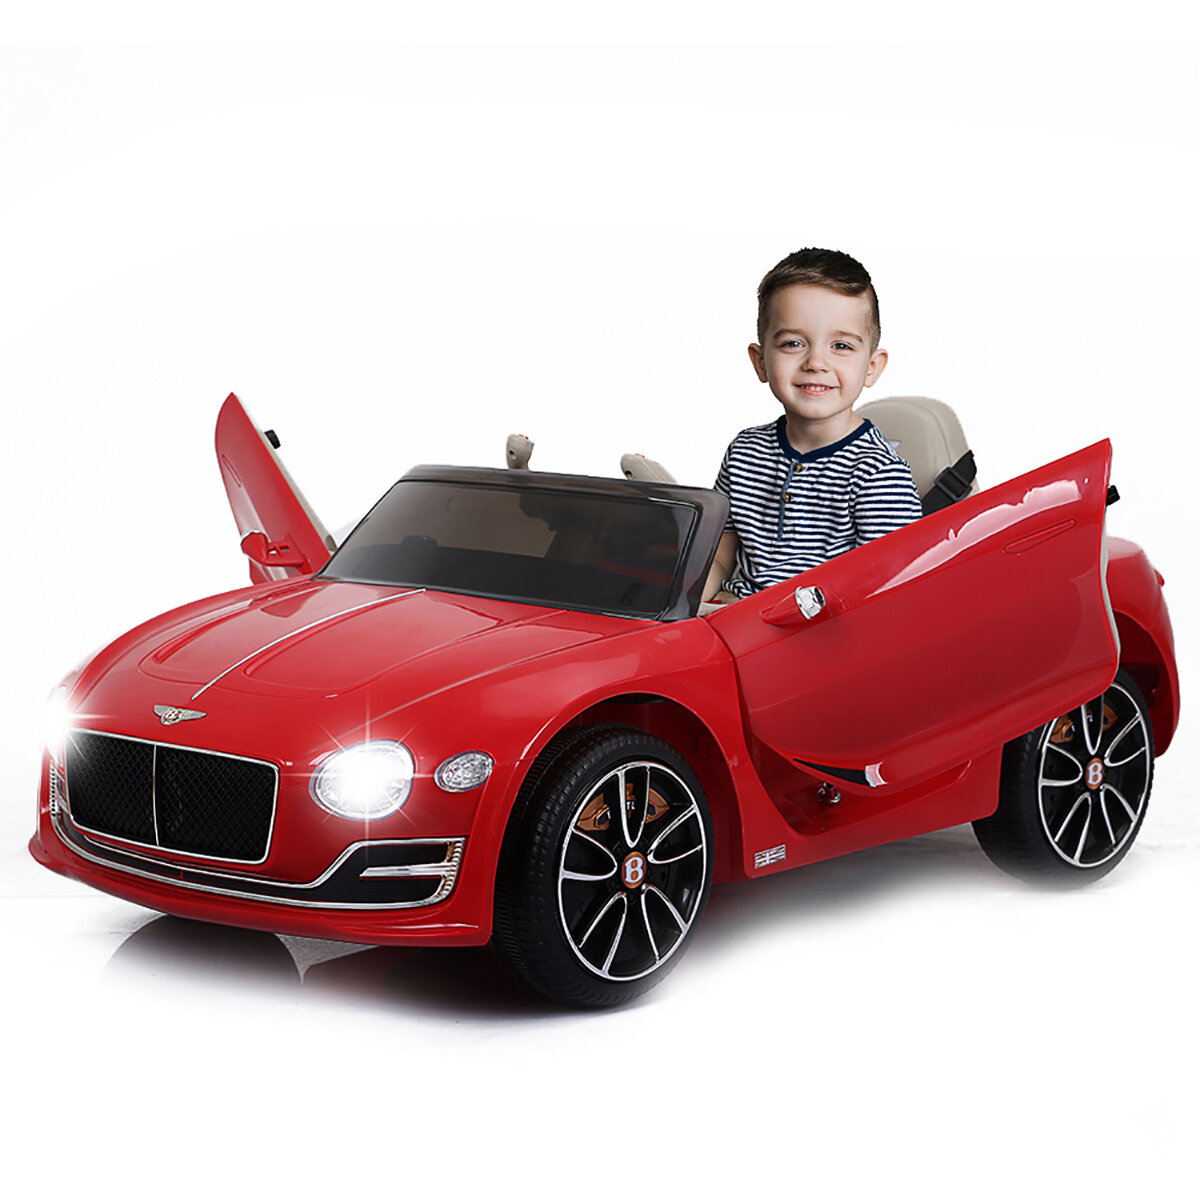 

JE1166 6V/12V Kids Ride on Car with Remote control Baby Electric Toy Cars Battery-Powered Car w/4 Wheels, MP3 Music, LED